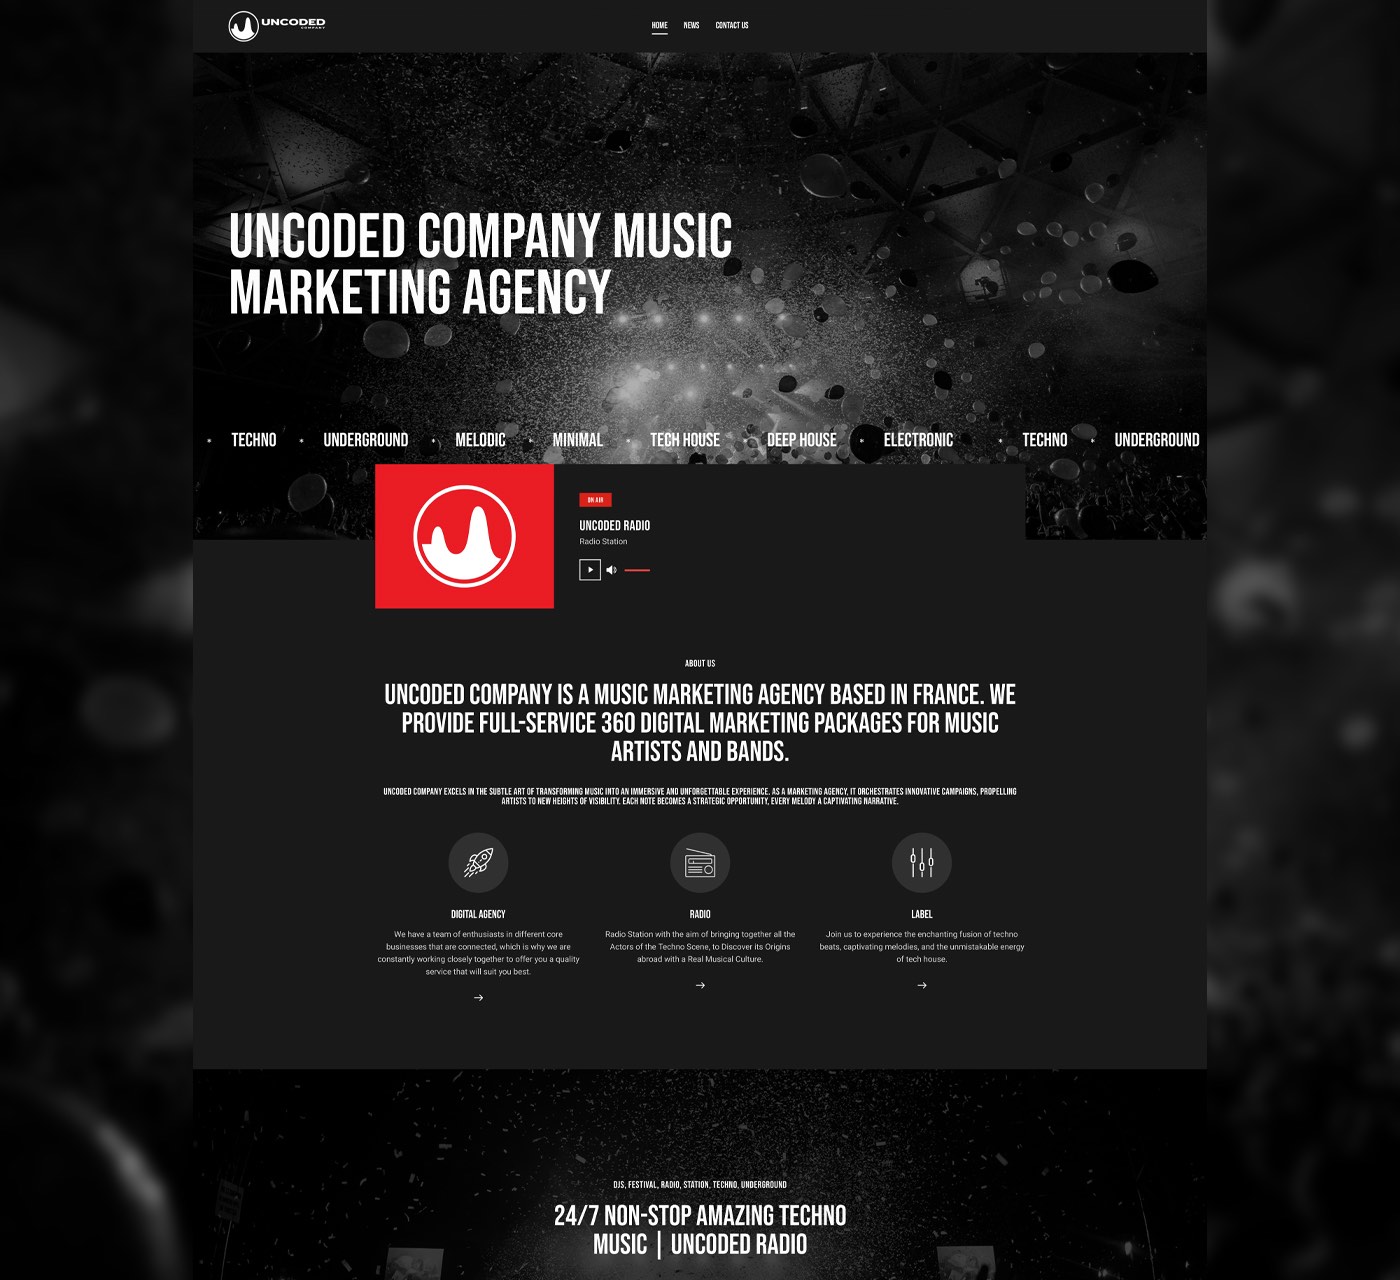 Uncoded Company is a music marketing agency based in france. Full-service 360 digital marketing packages for music promotion artists and bands.